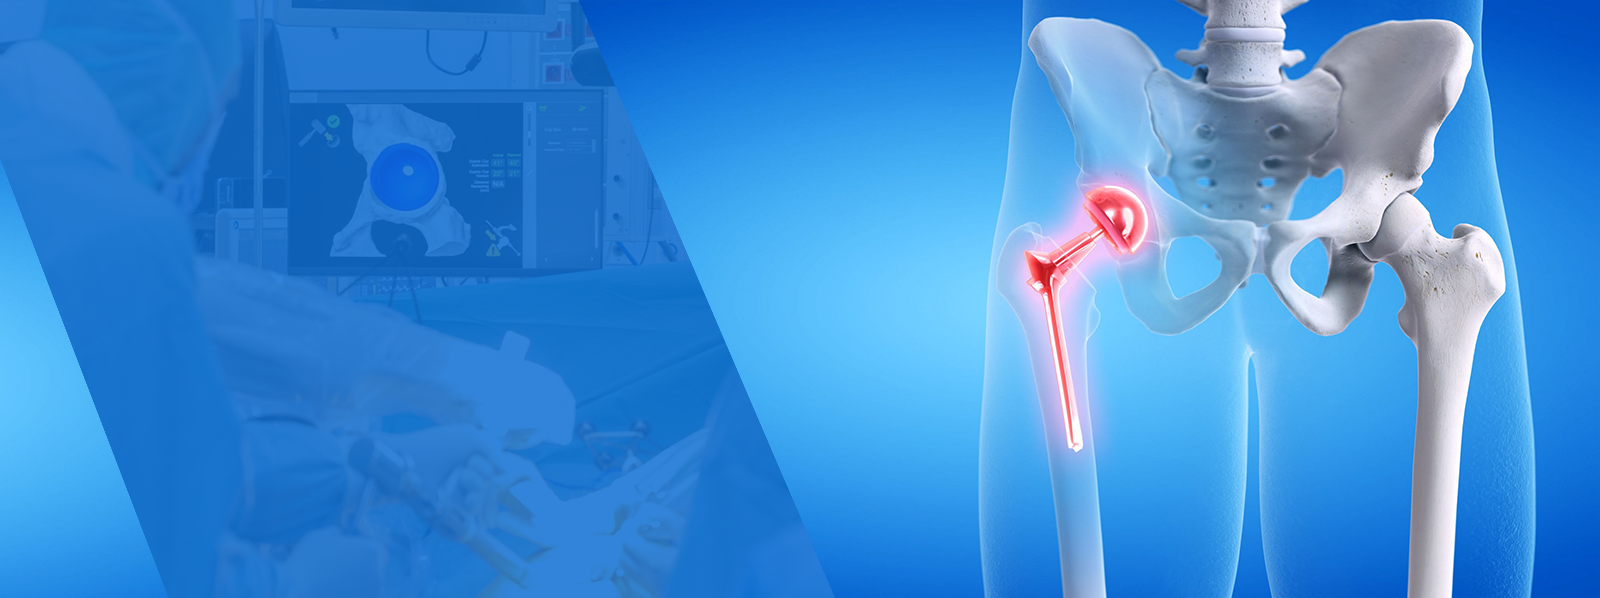 Computer Assisted Knee Replacements in jaipur india Dr. Anoop Jhurani